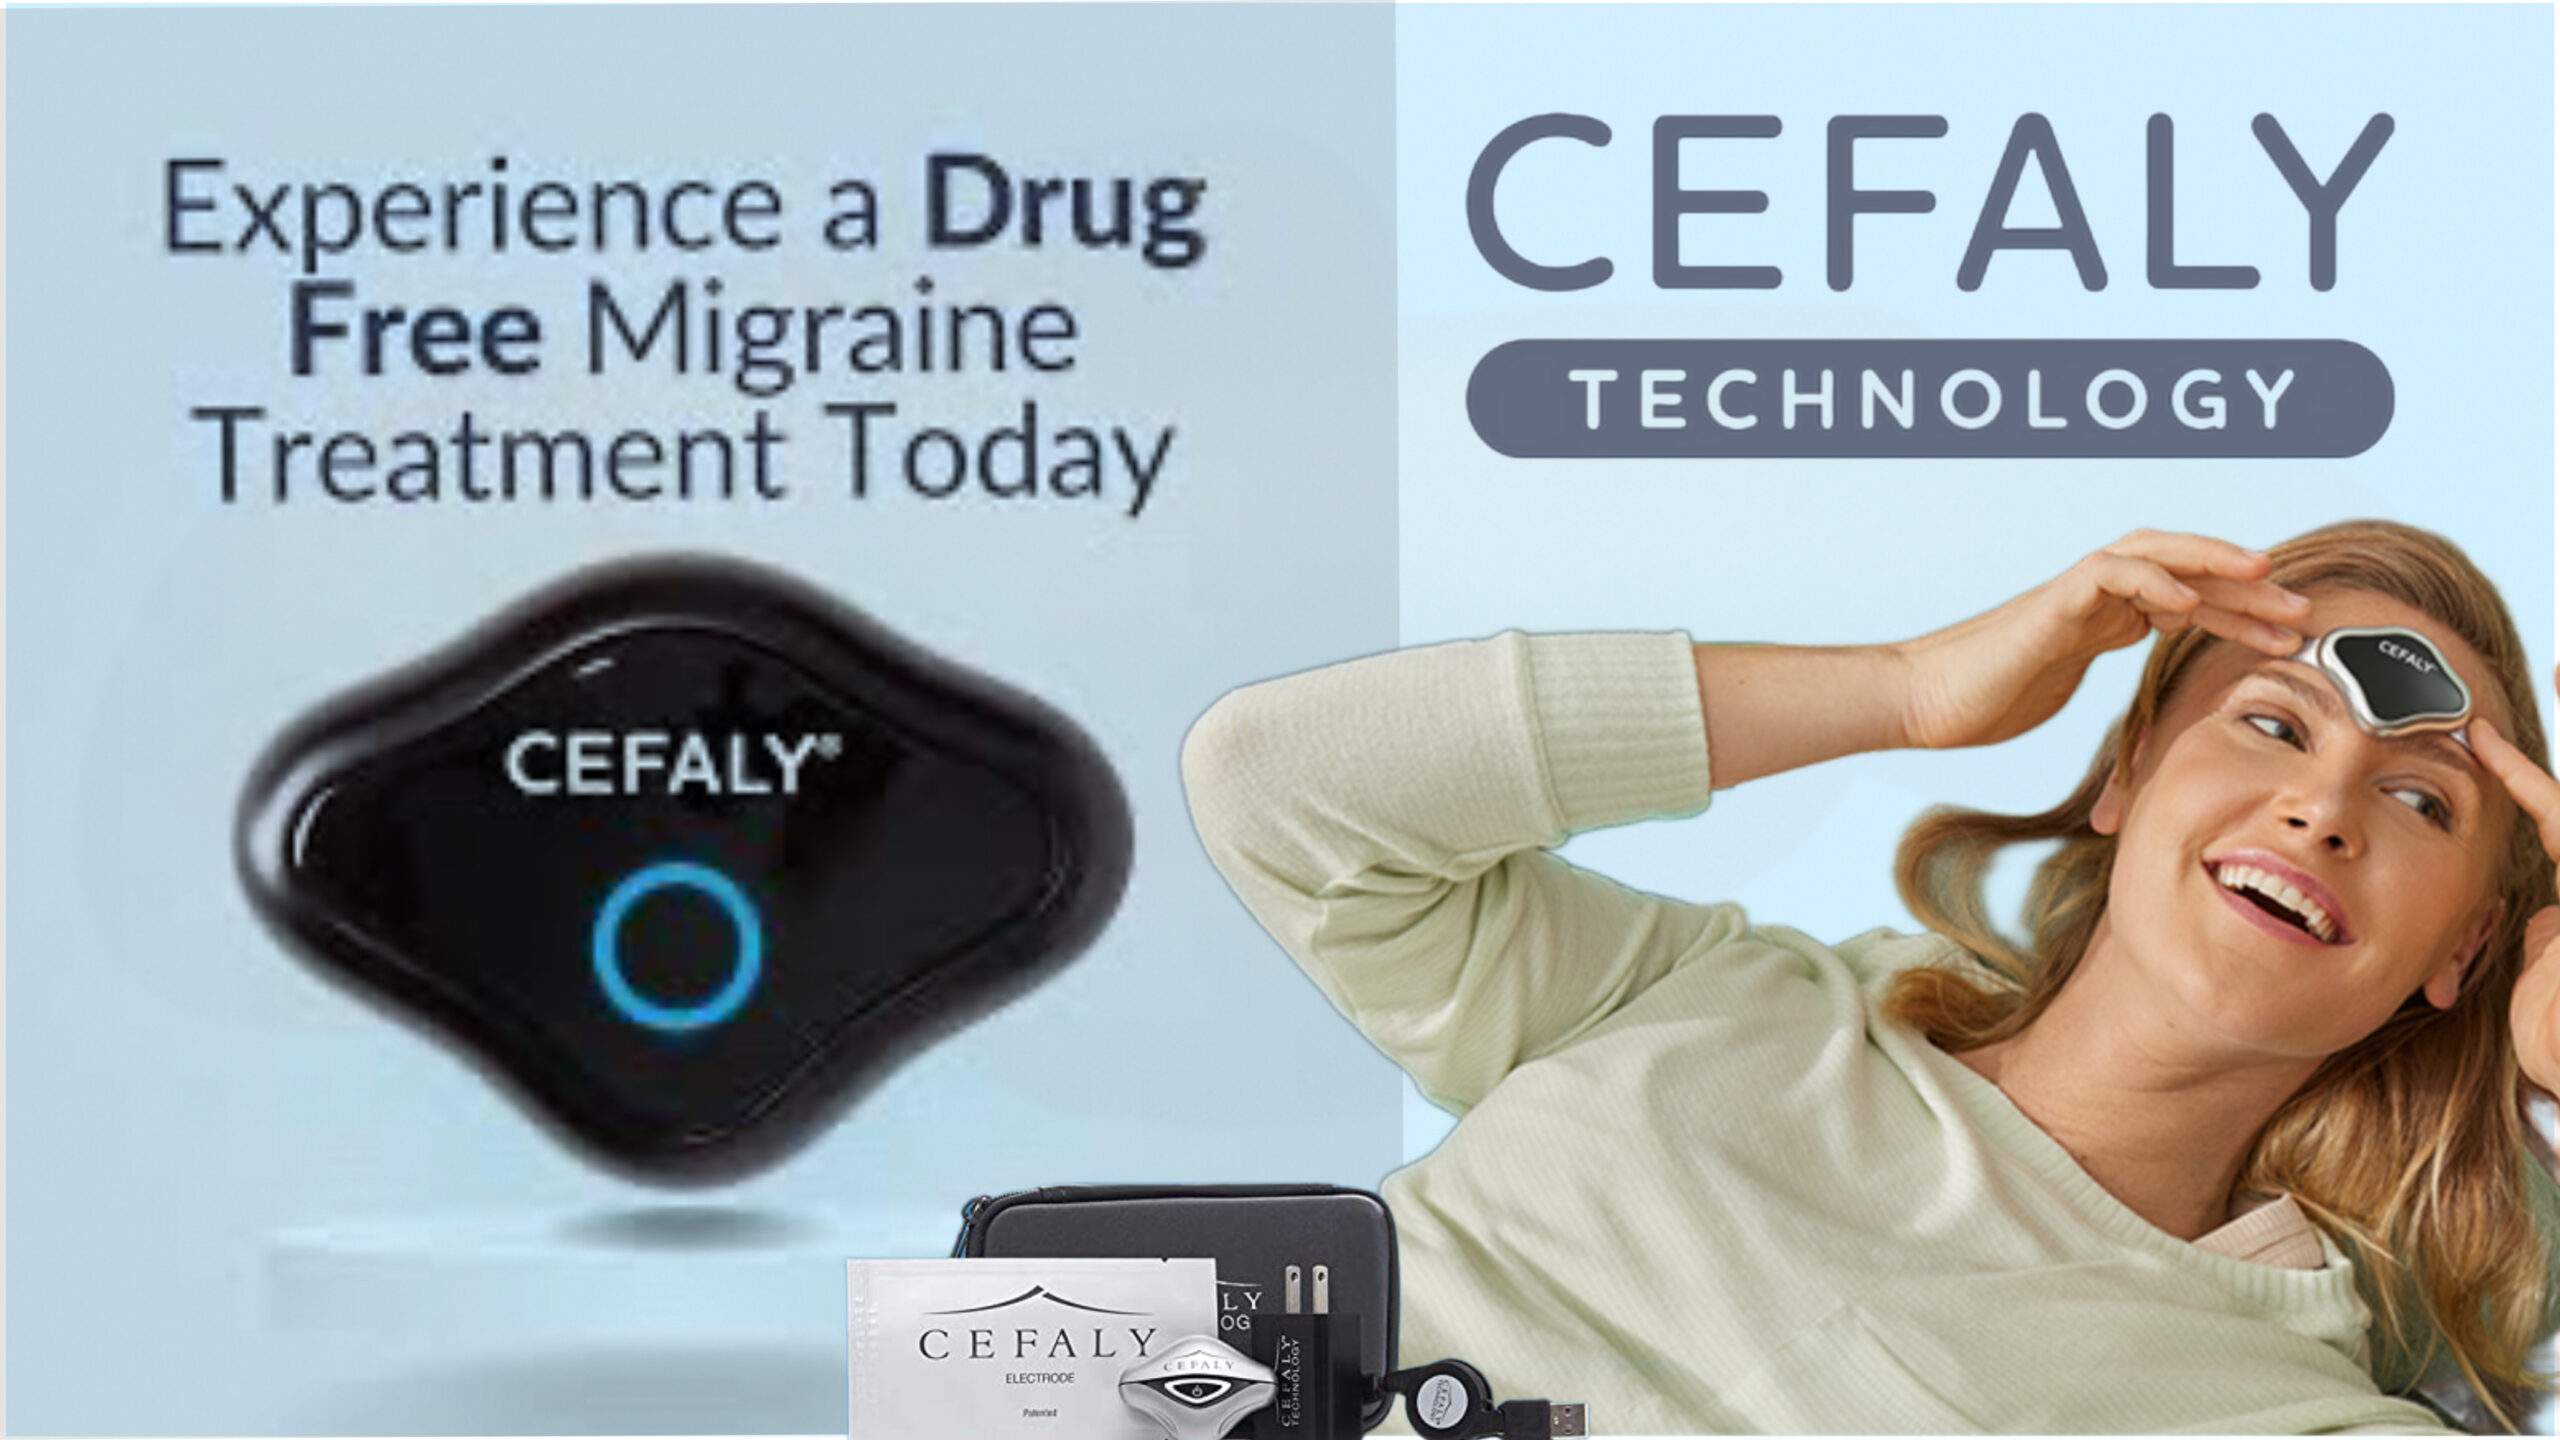 CEFALY Technology of migraine